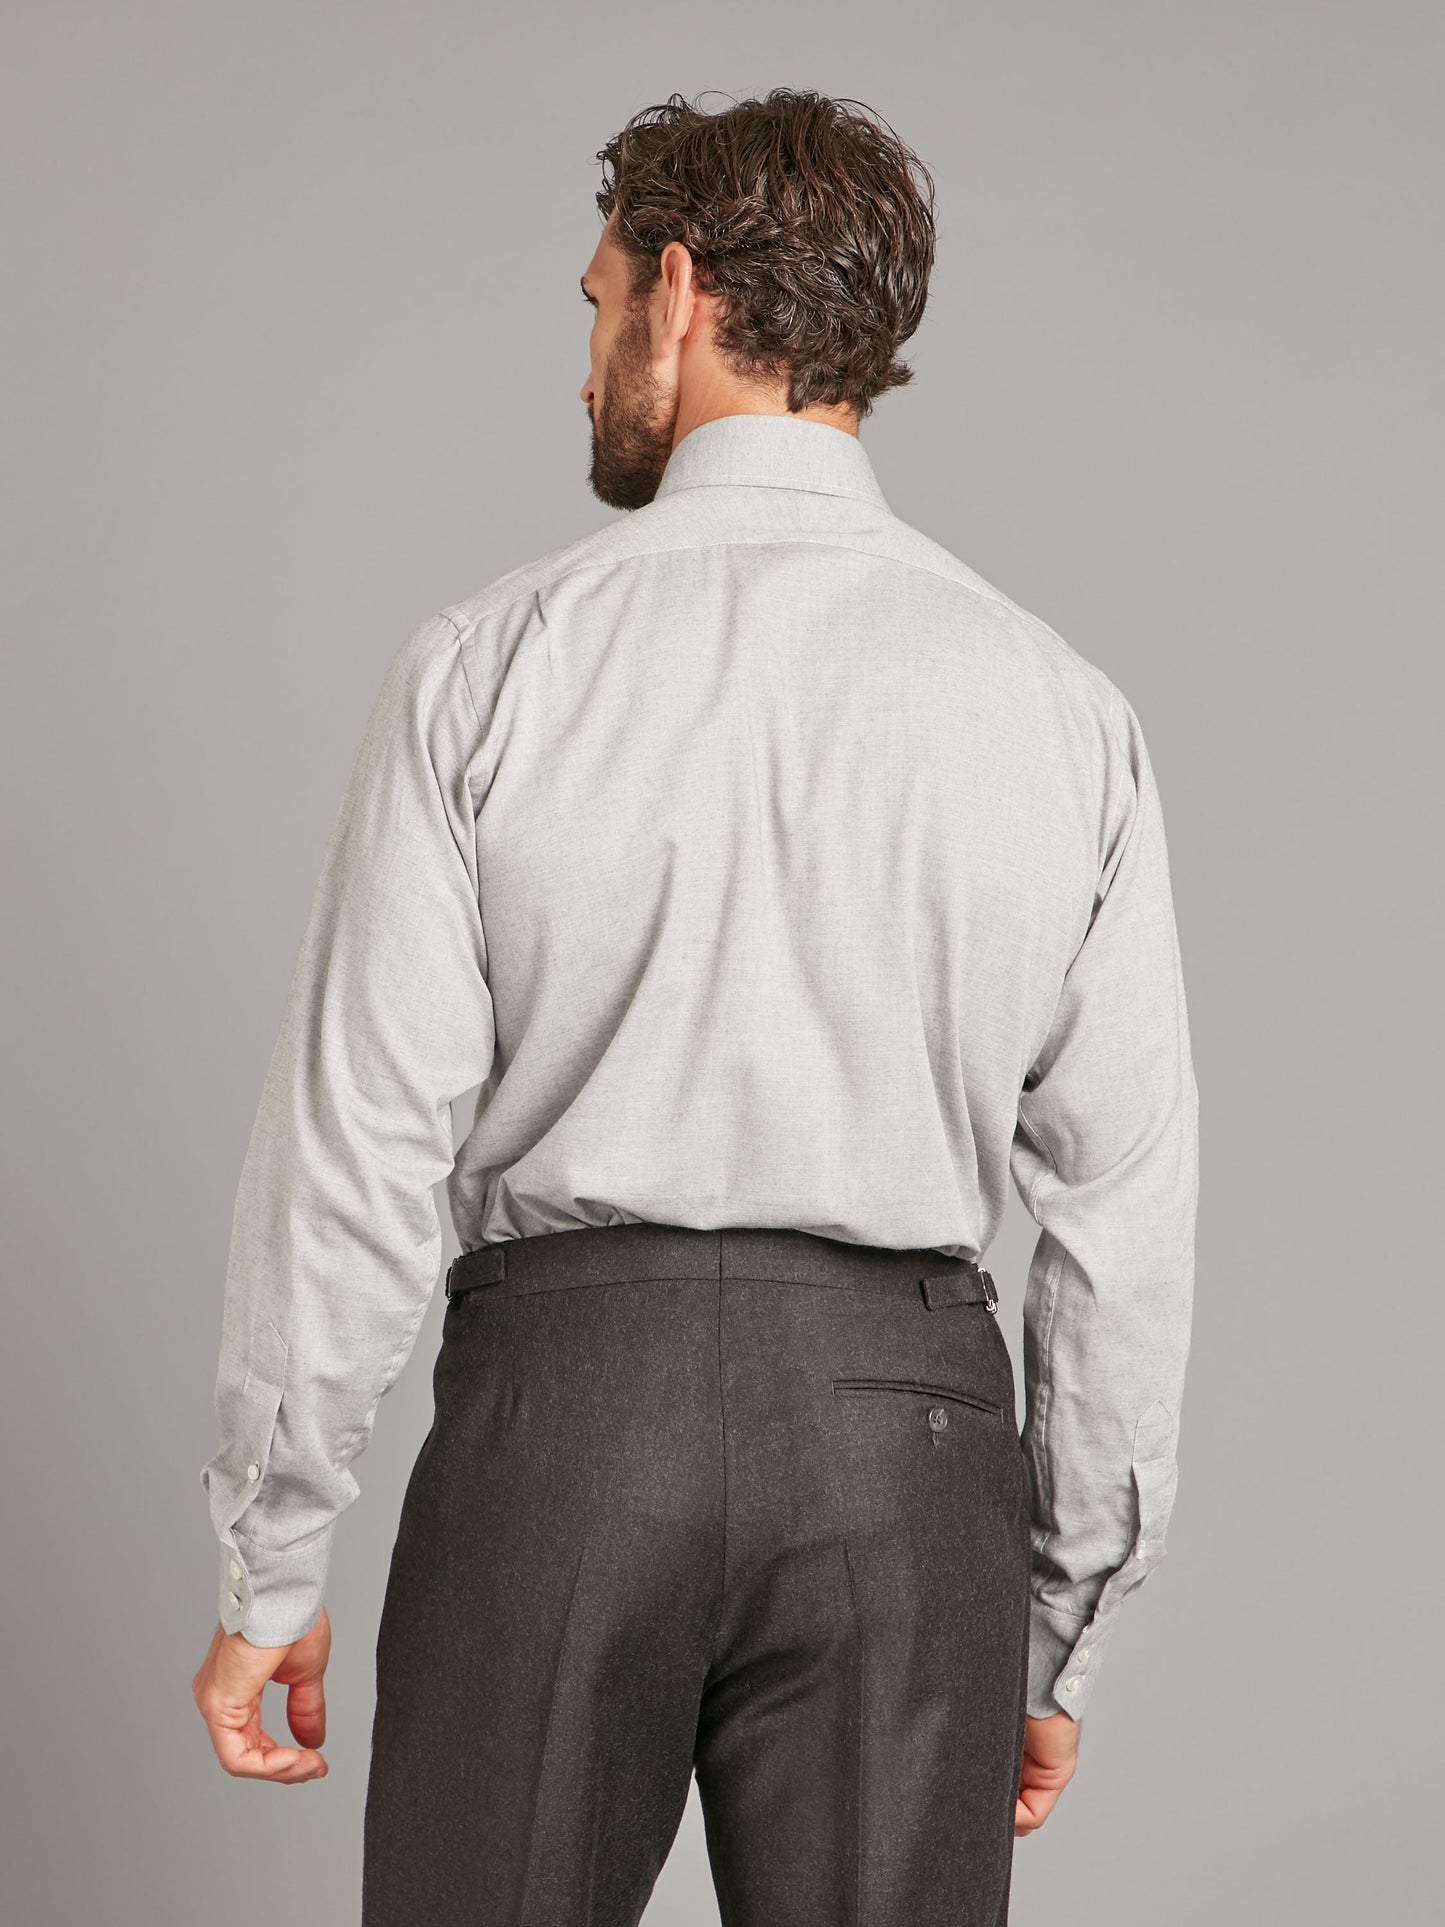 pleated trouser grey flannel 4